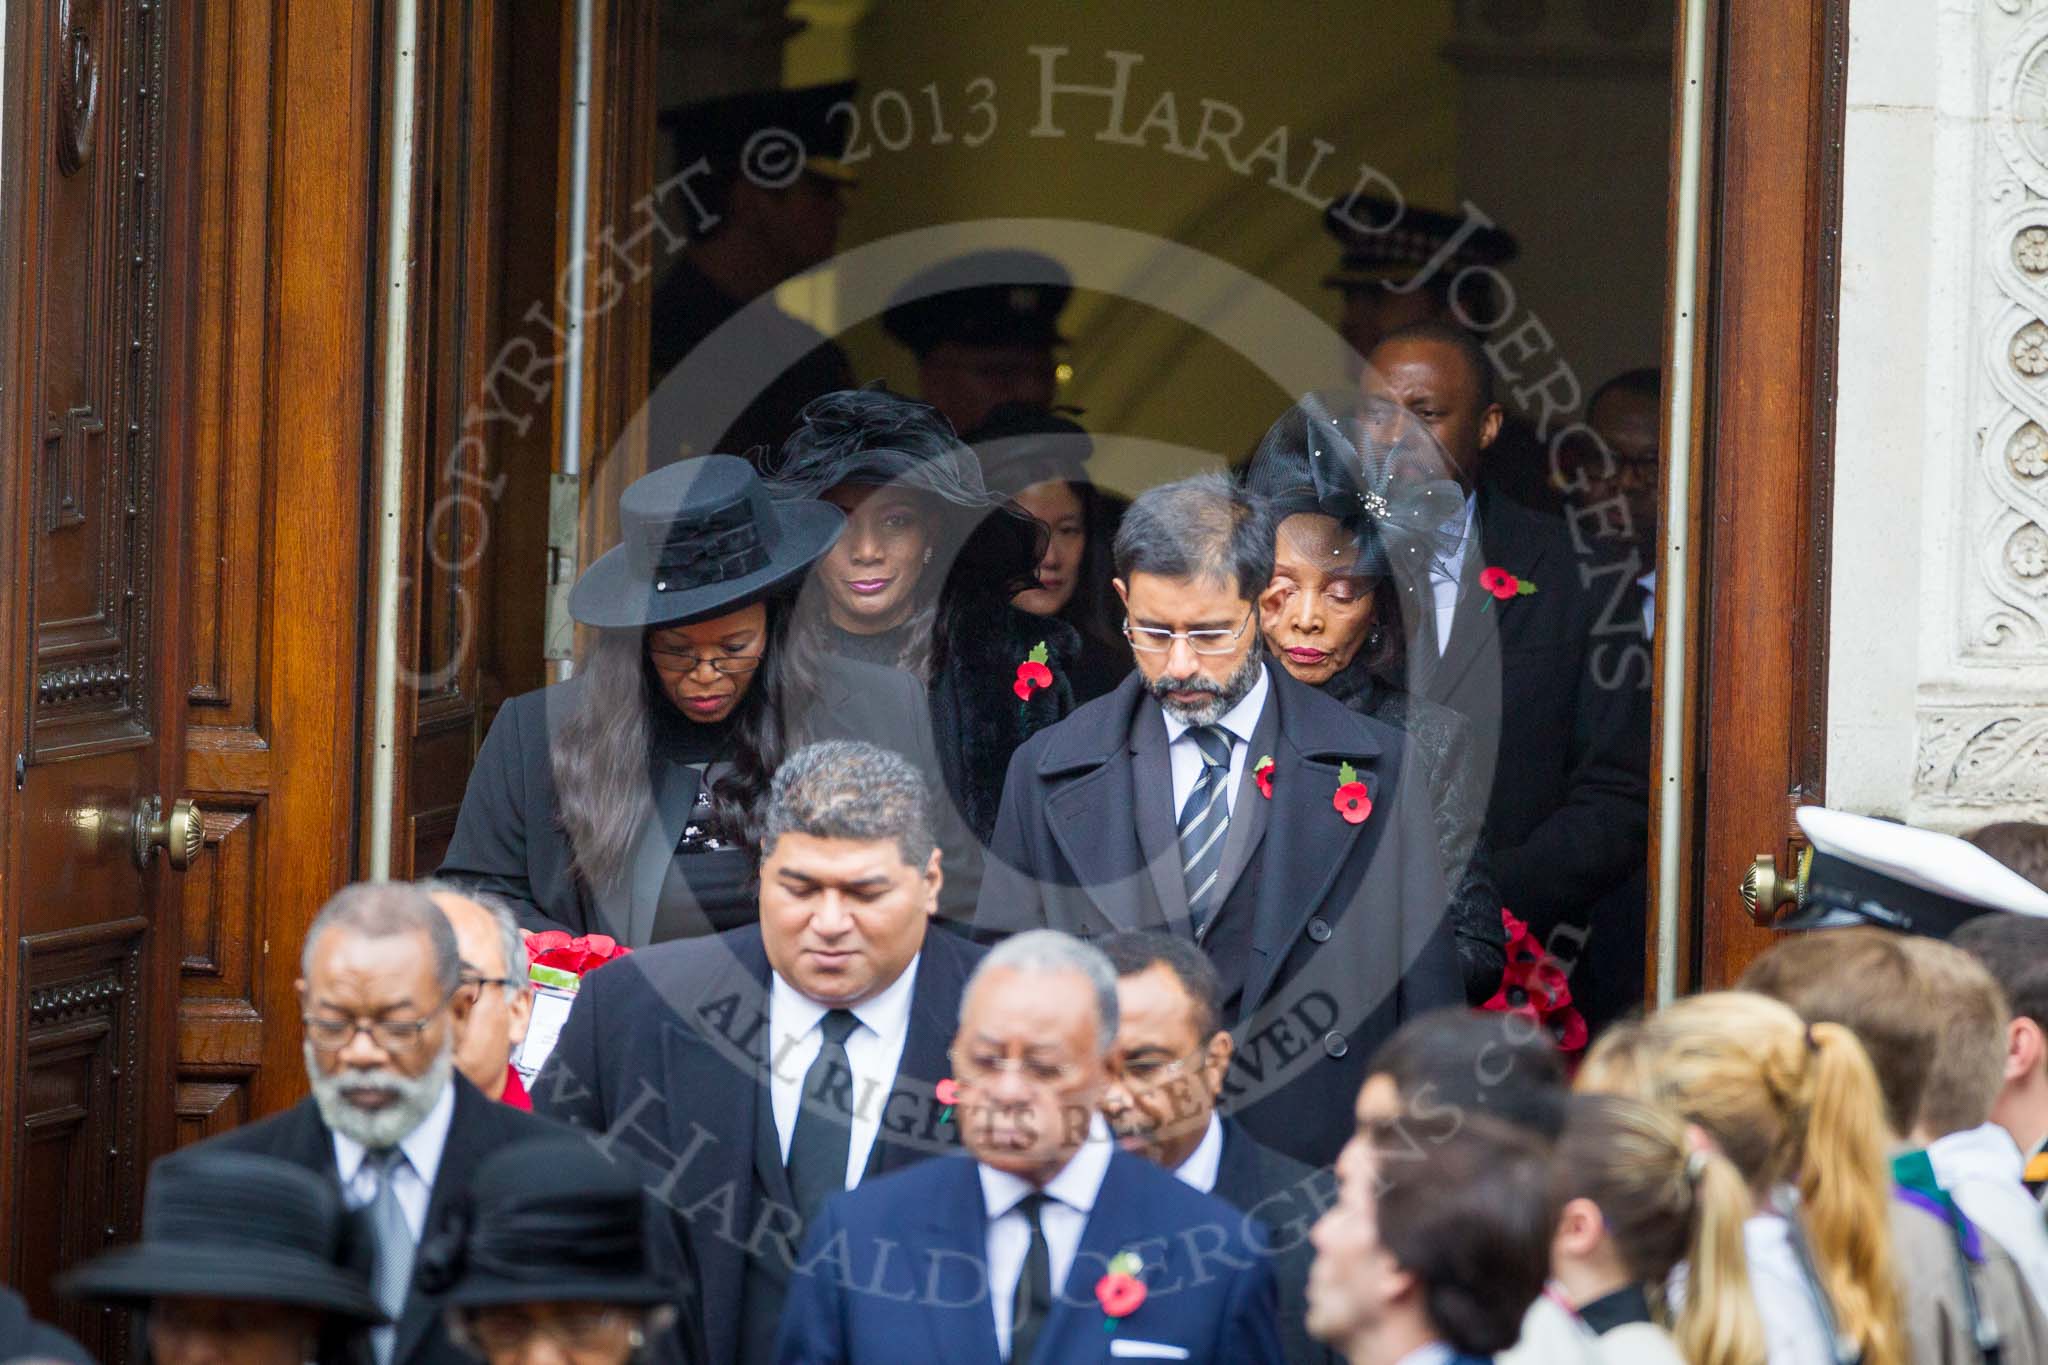 Remembrance Sunday at the Cenotaph 2015: The High Commissioners or their representatives leaving the Foreign- and Commonwealth Office. Image #97, 08 November 2015 10:55 Whitehall, London, UK